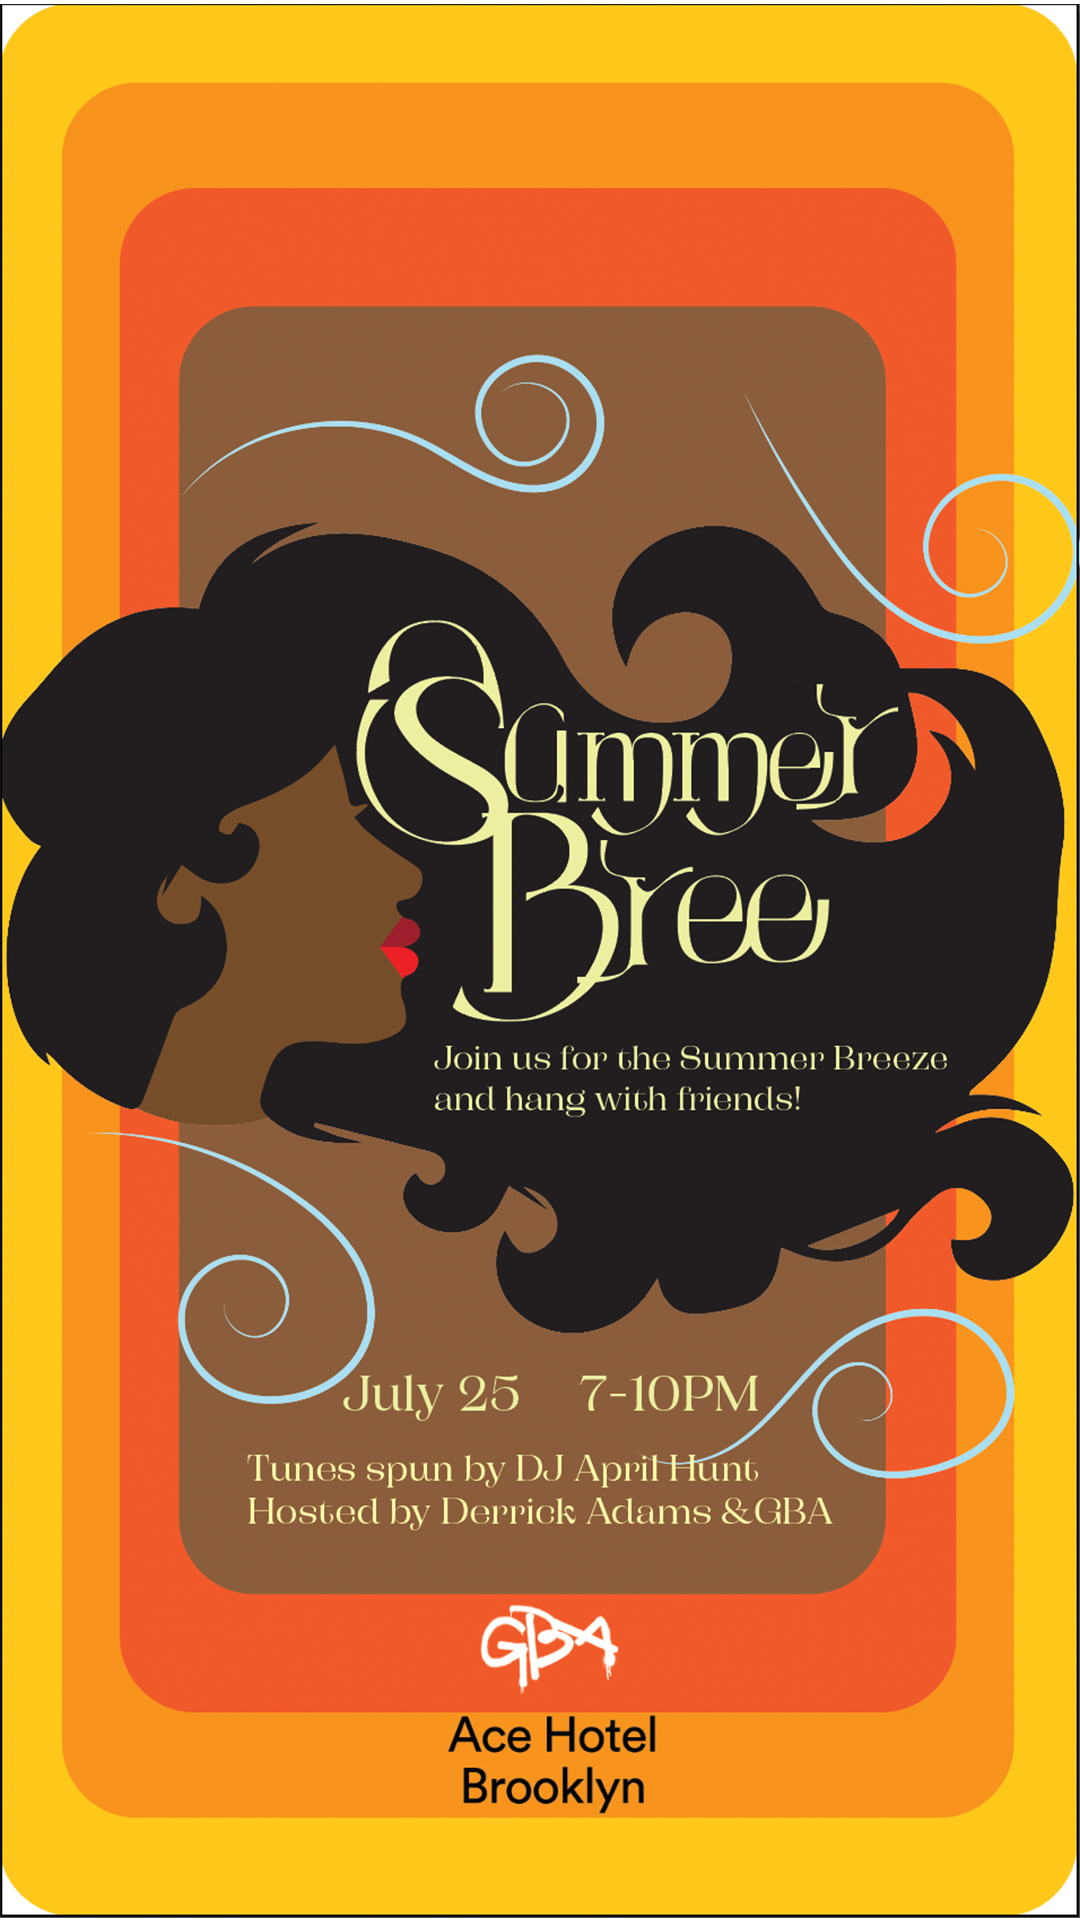 Summer breeze promo flyer for Tuesday event with GBA